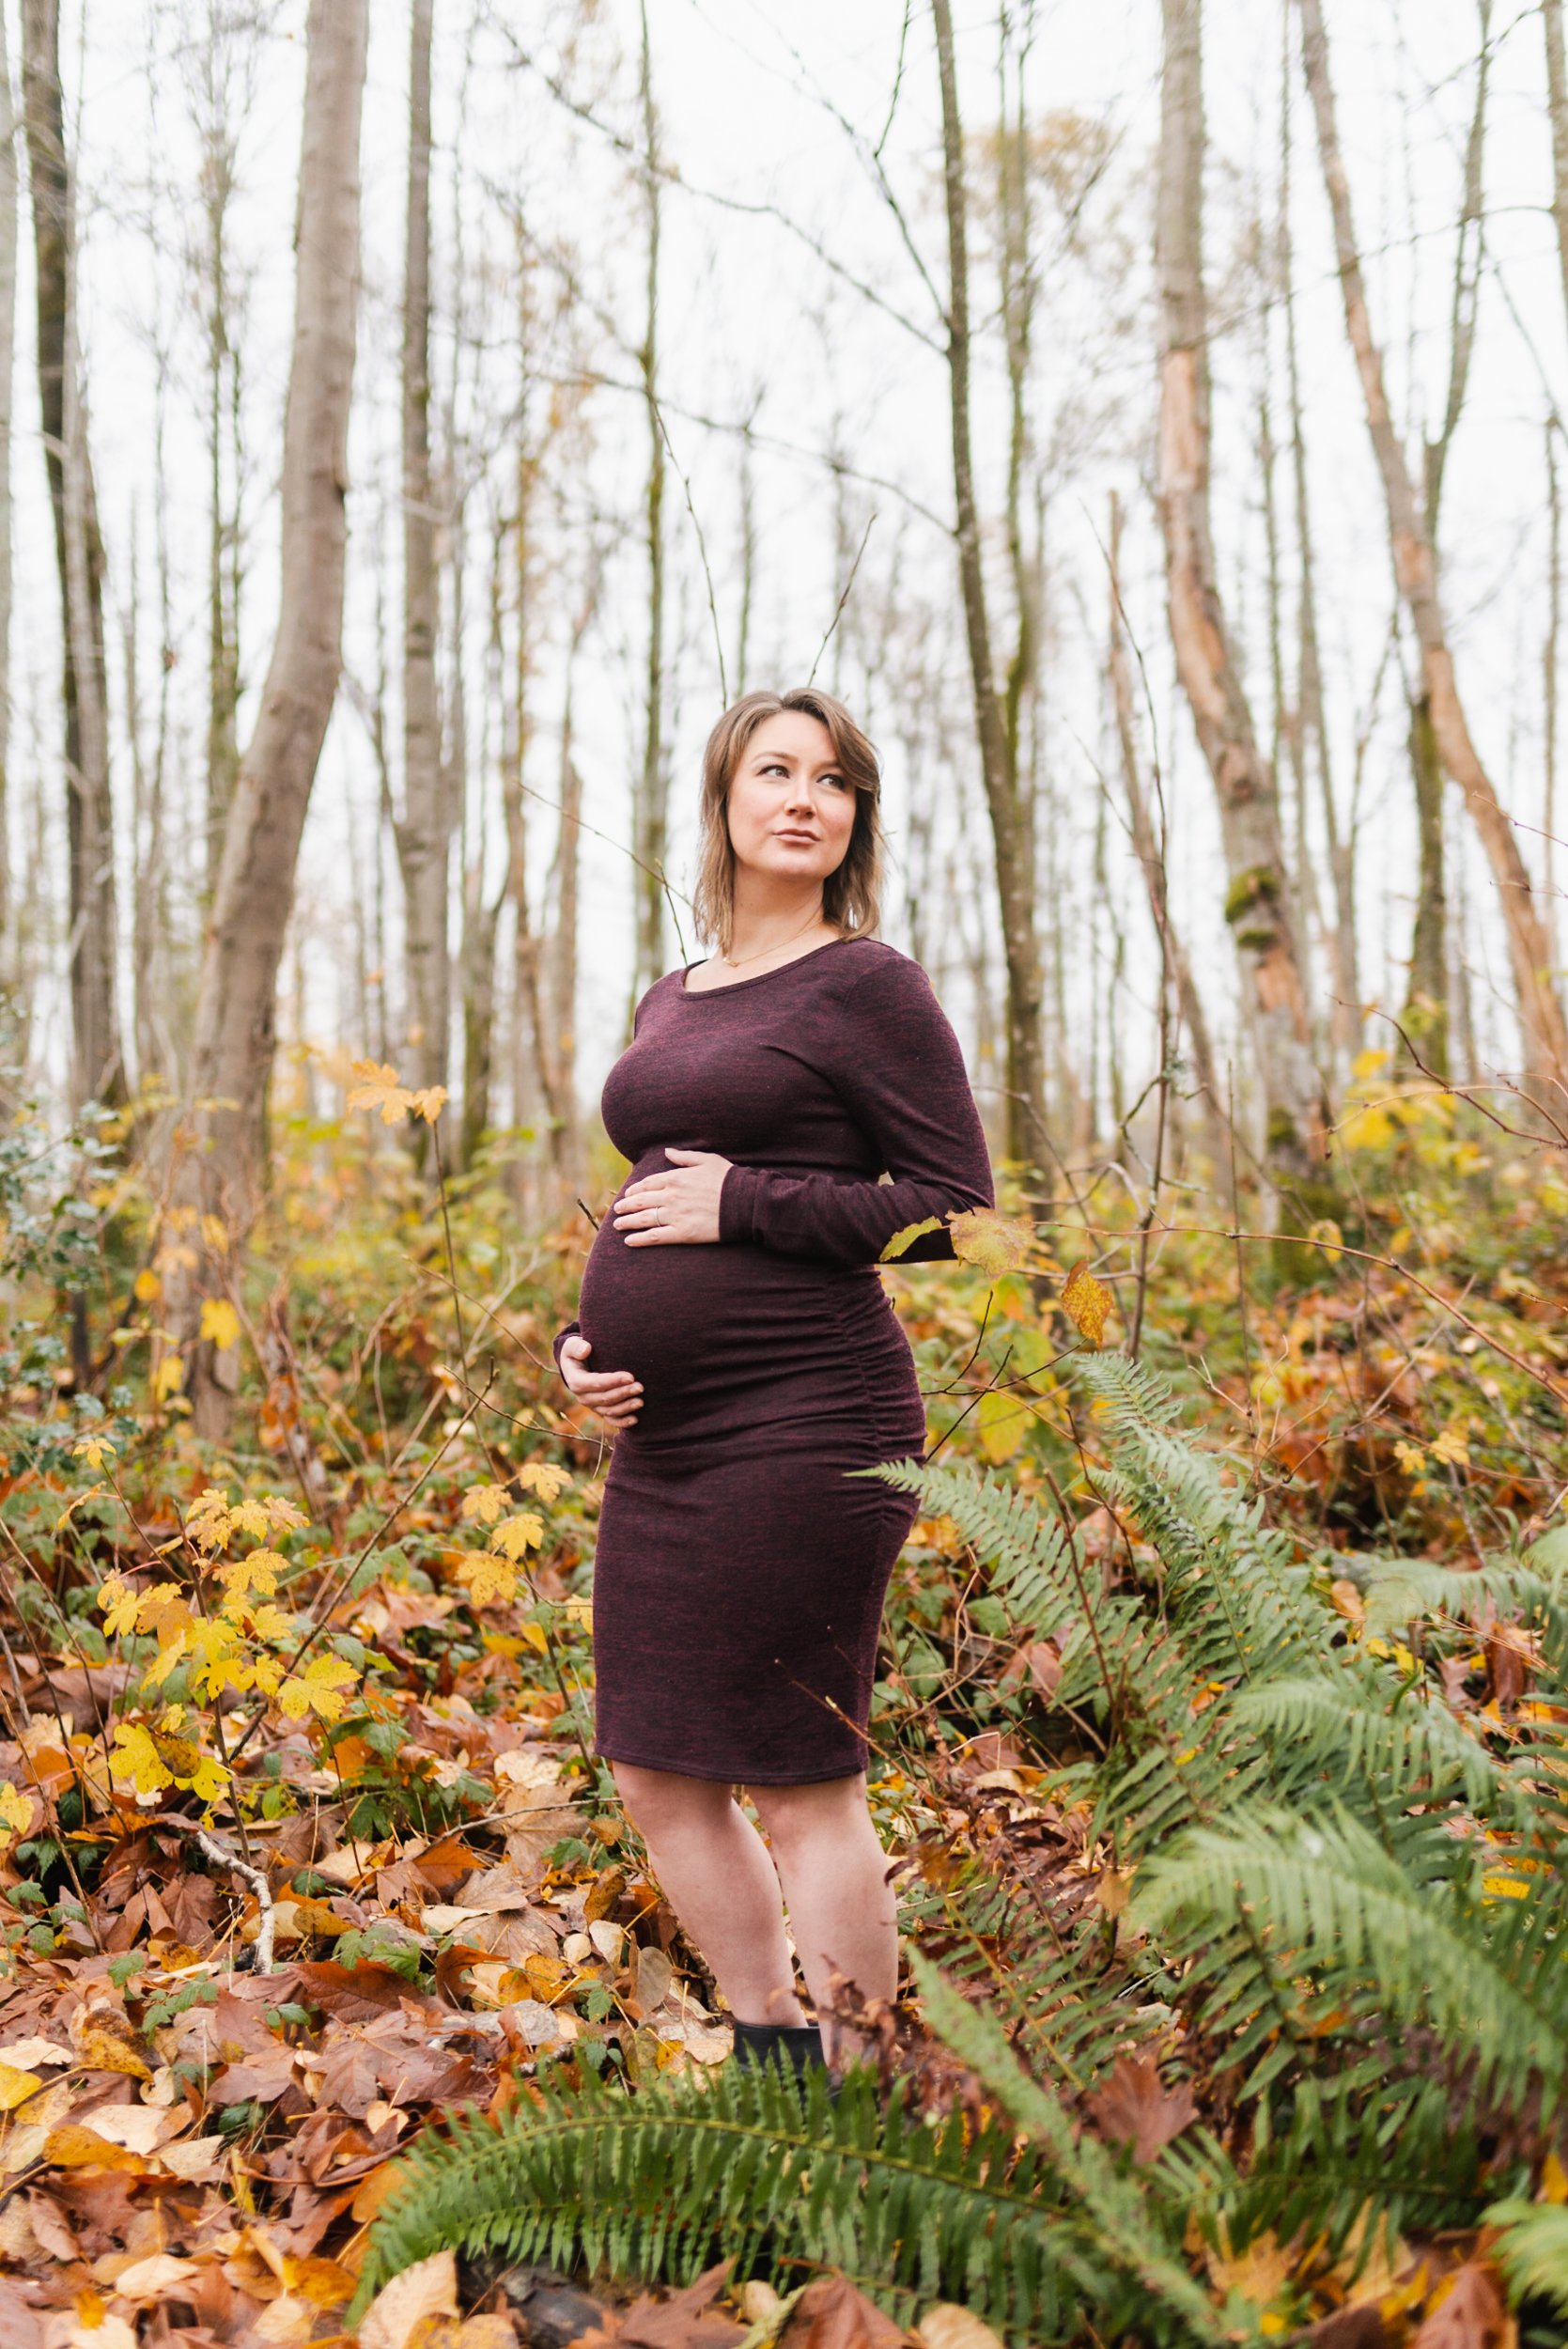 Pregnant woman burgundy dress in forest